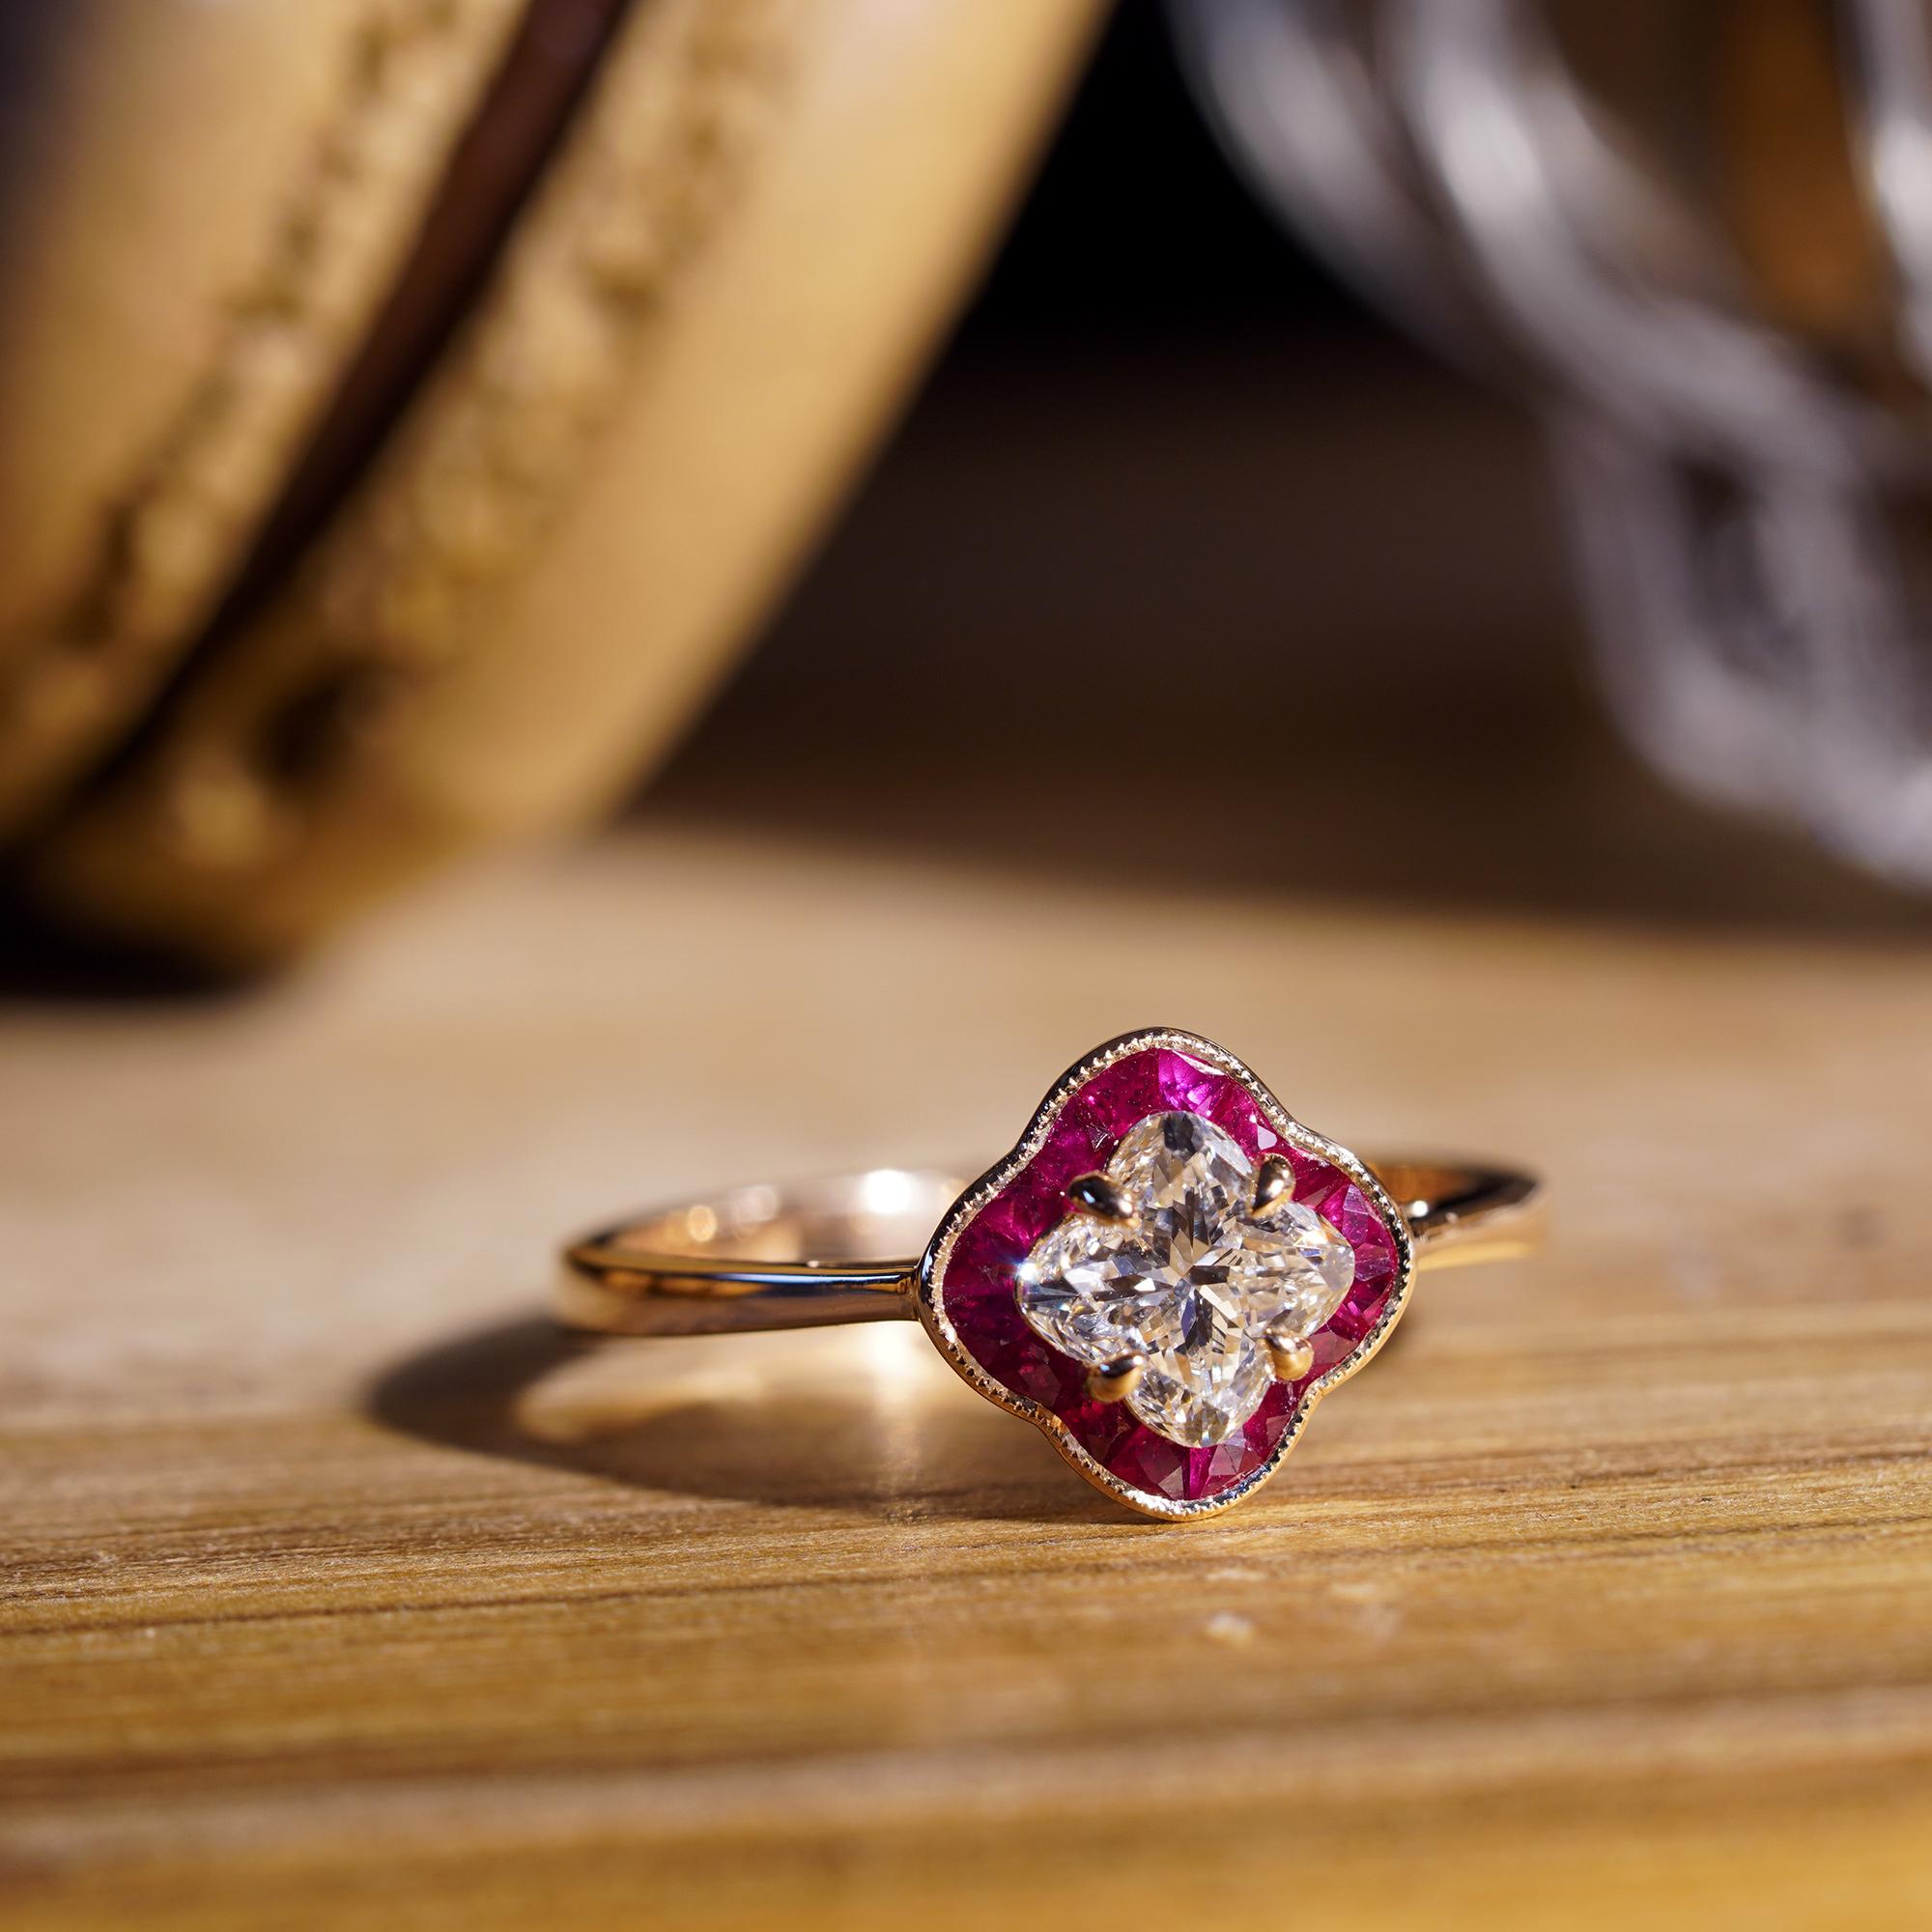 This delicate halo diamond and ruby engagement ring featuring a certified 0.07 carat lily cut diamond in prong set surrounded by French cut rubies. The ring is a classic choice with a modern twist! If you’re looking for an engagement  ring with a